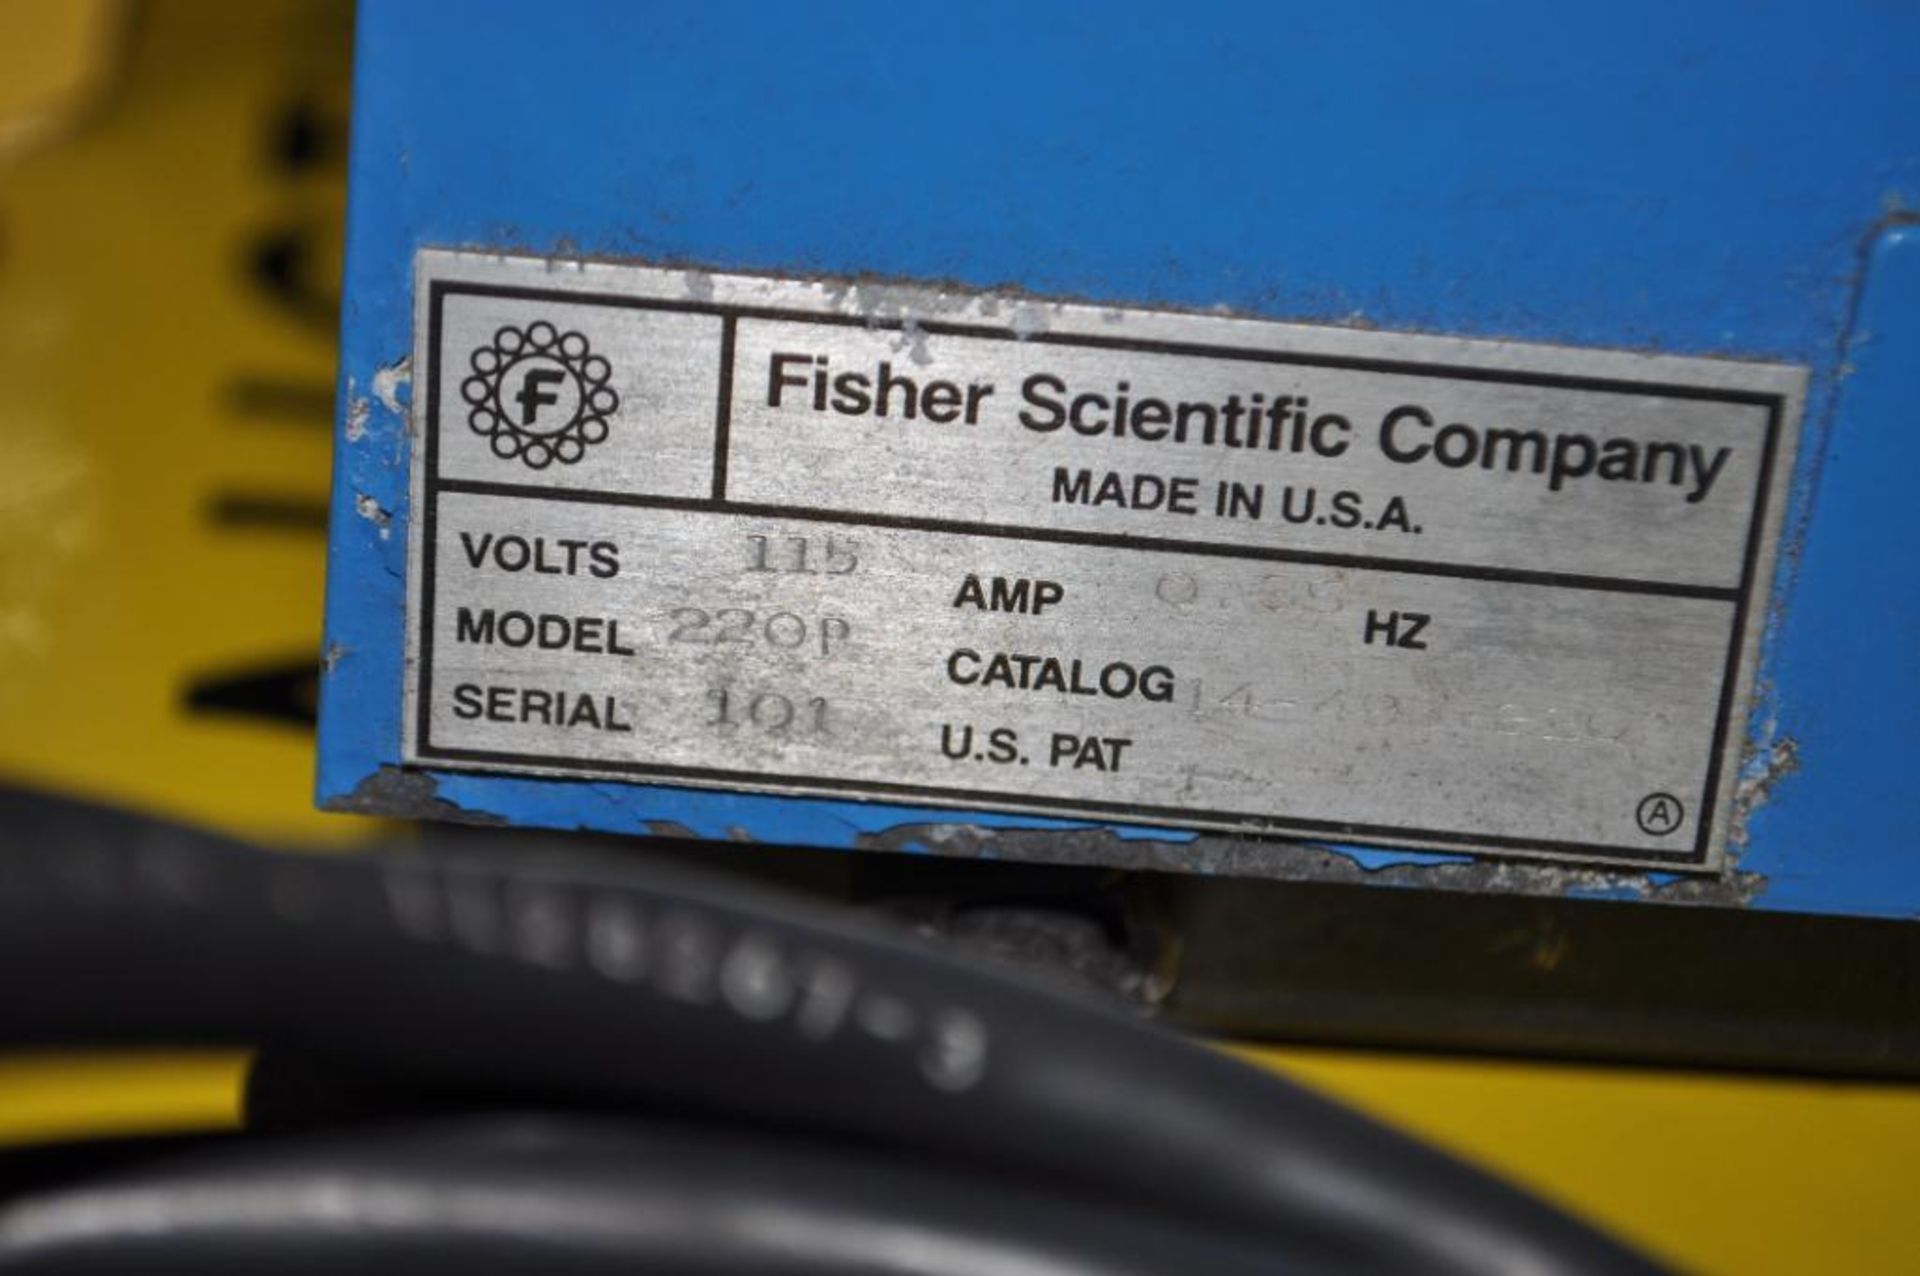 FISHER SCIENTIFIC COMPANY FISHER THERMIX MAGNETIC STIRRER, MODEL: 220P, 115 VOLTS - Image 5 of 5